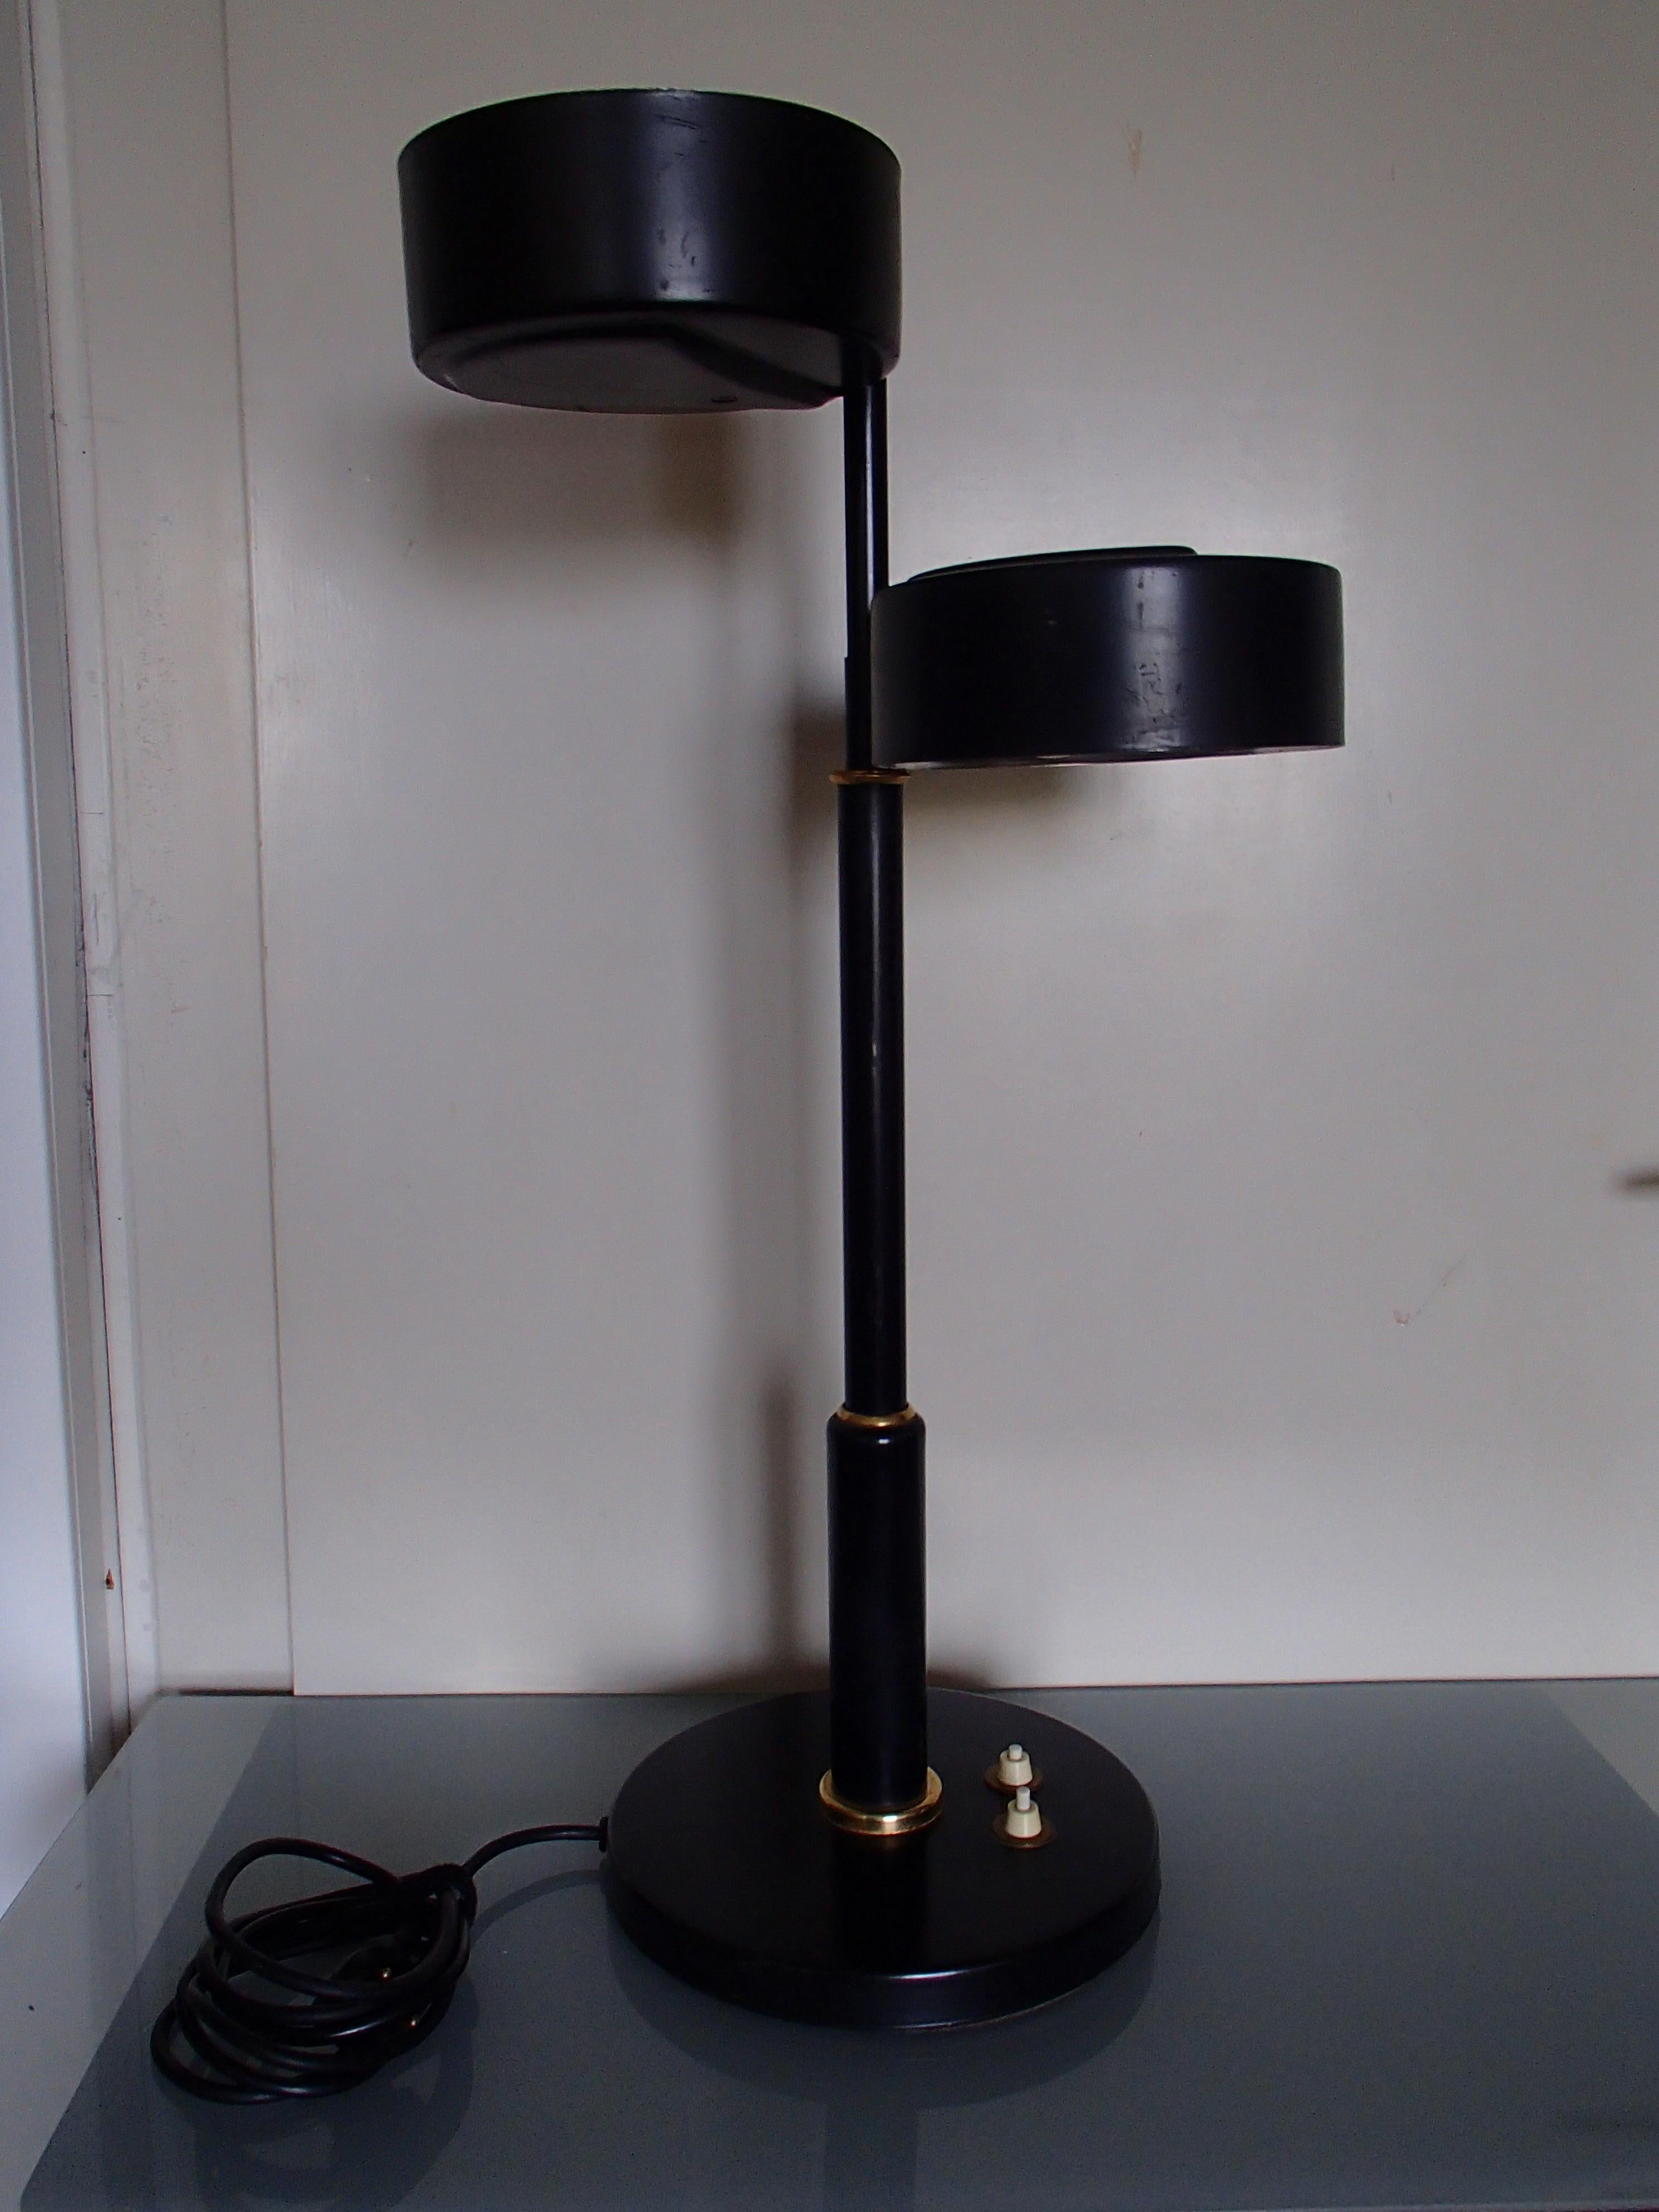 Bauhaus double light black table lamp each light can be switched separately.